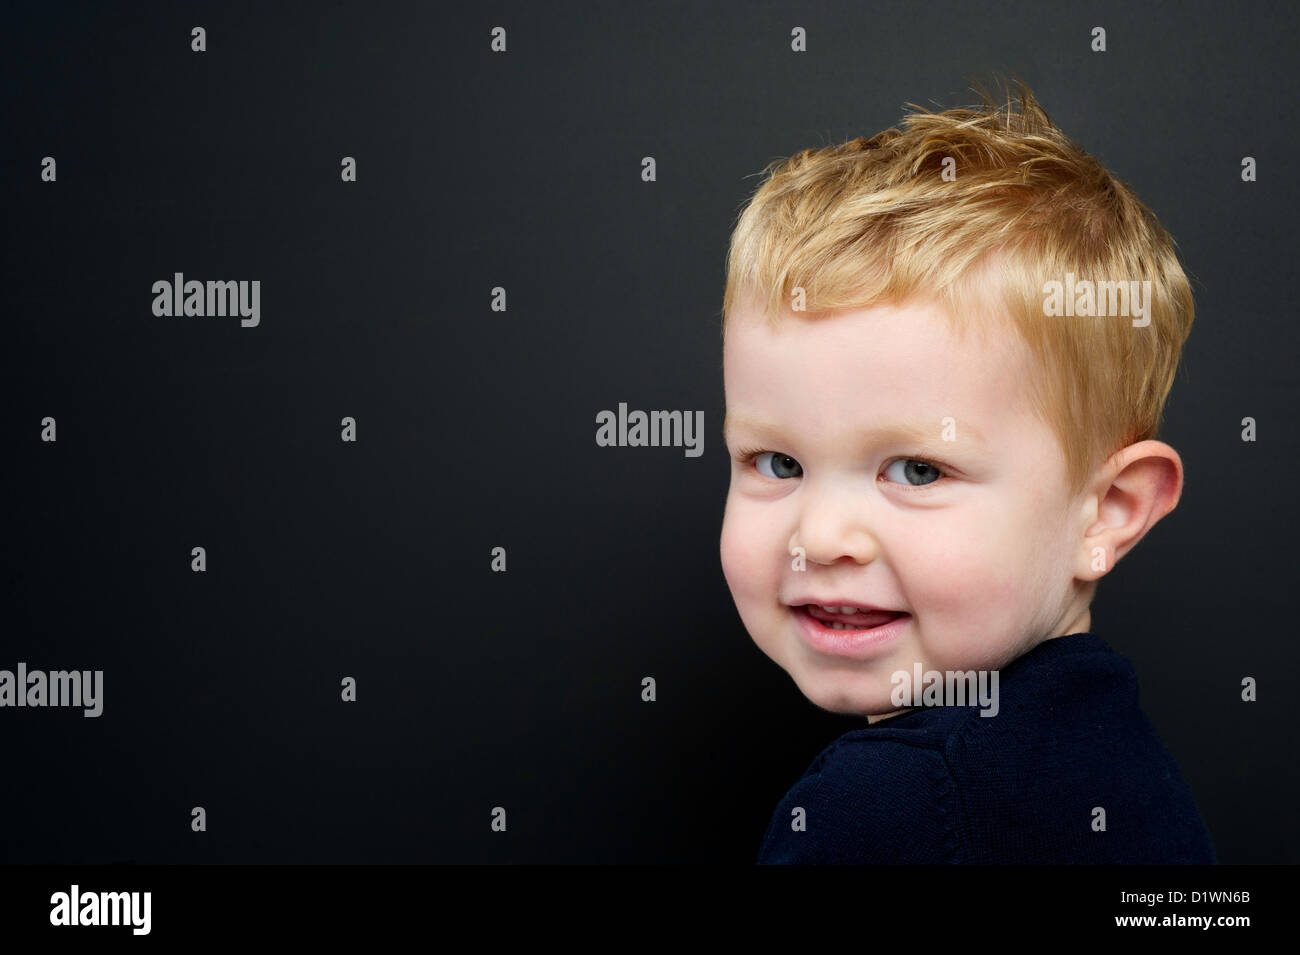 Smart young boy wearing a navy blue jumper standing in front of a blackboard Stock Photo